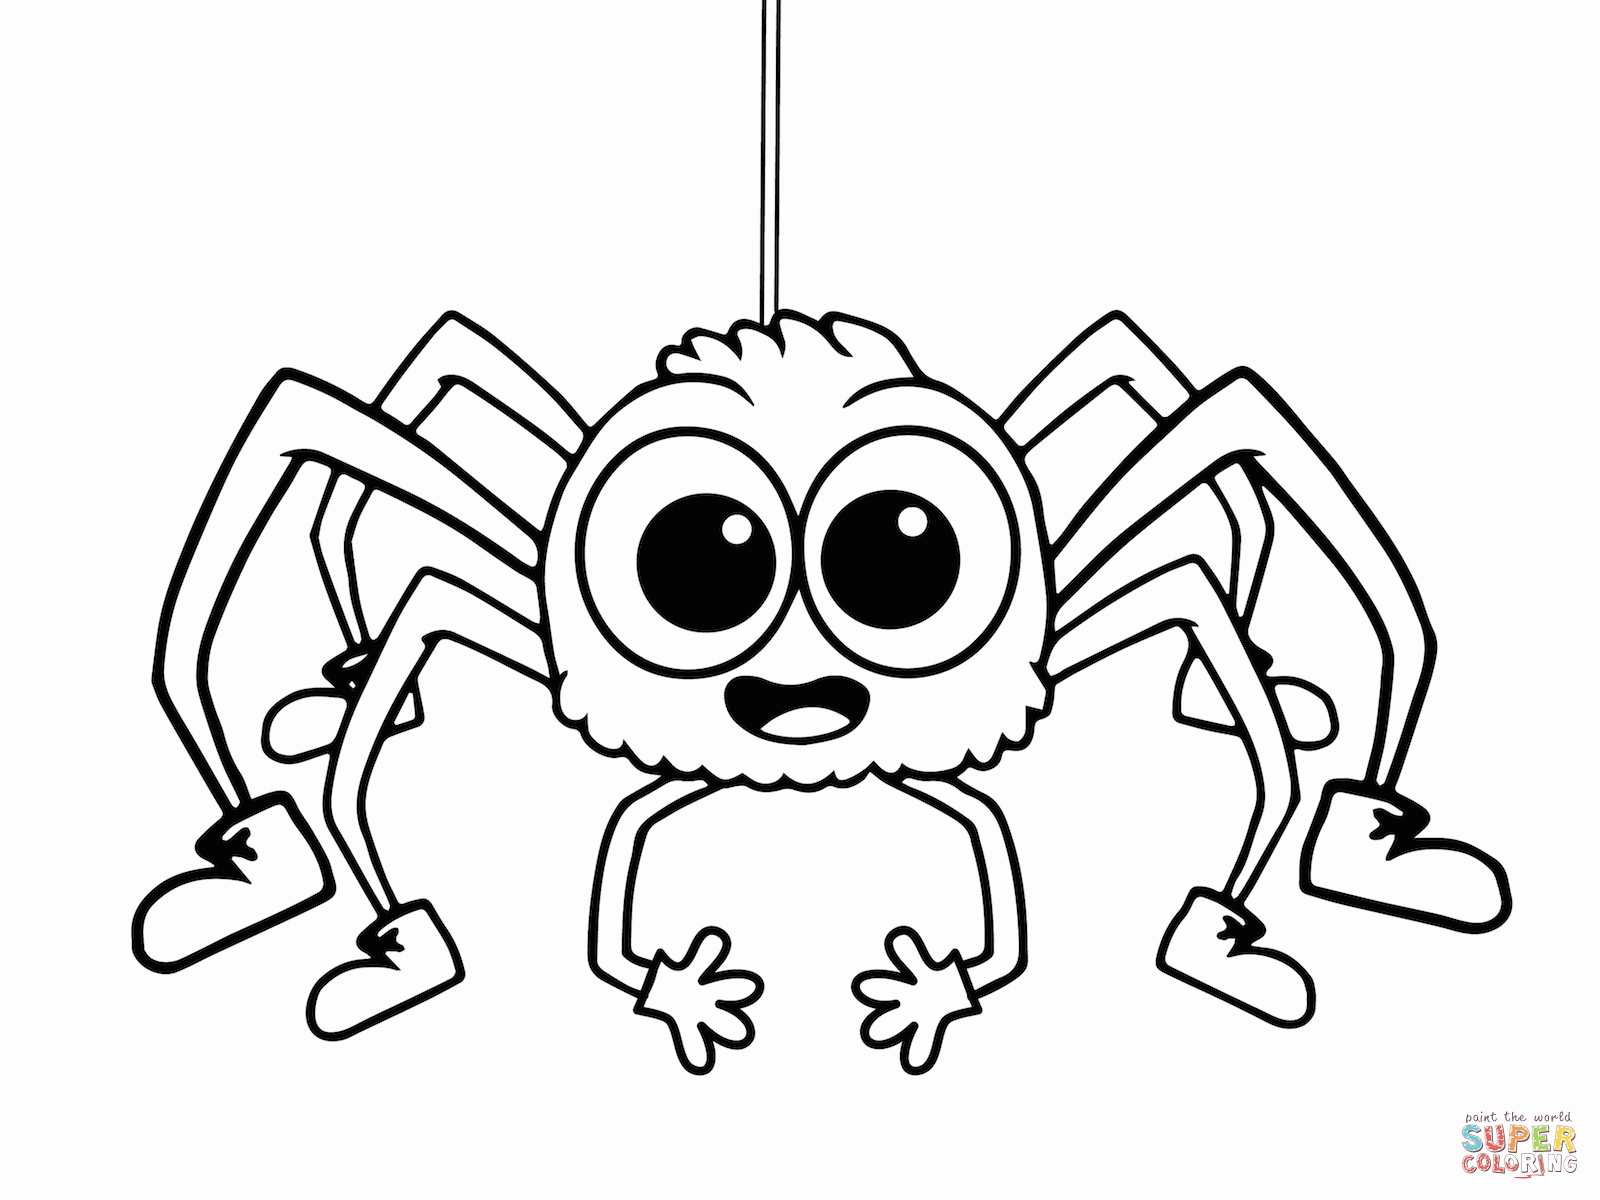 Free Coloring Page Of A Spider, Download Free Coloring Page Of A Spider